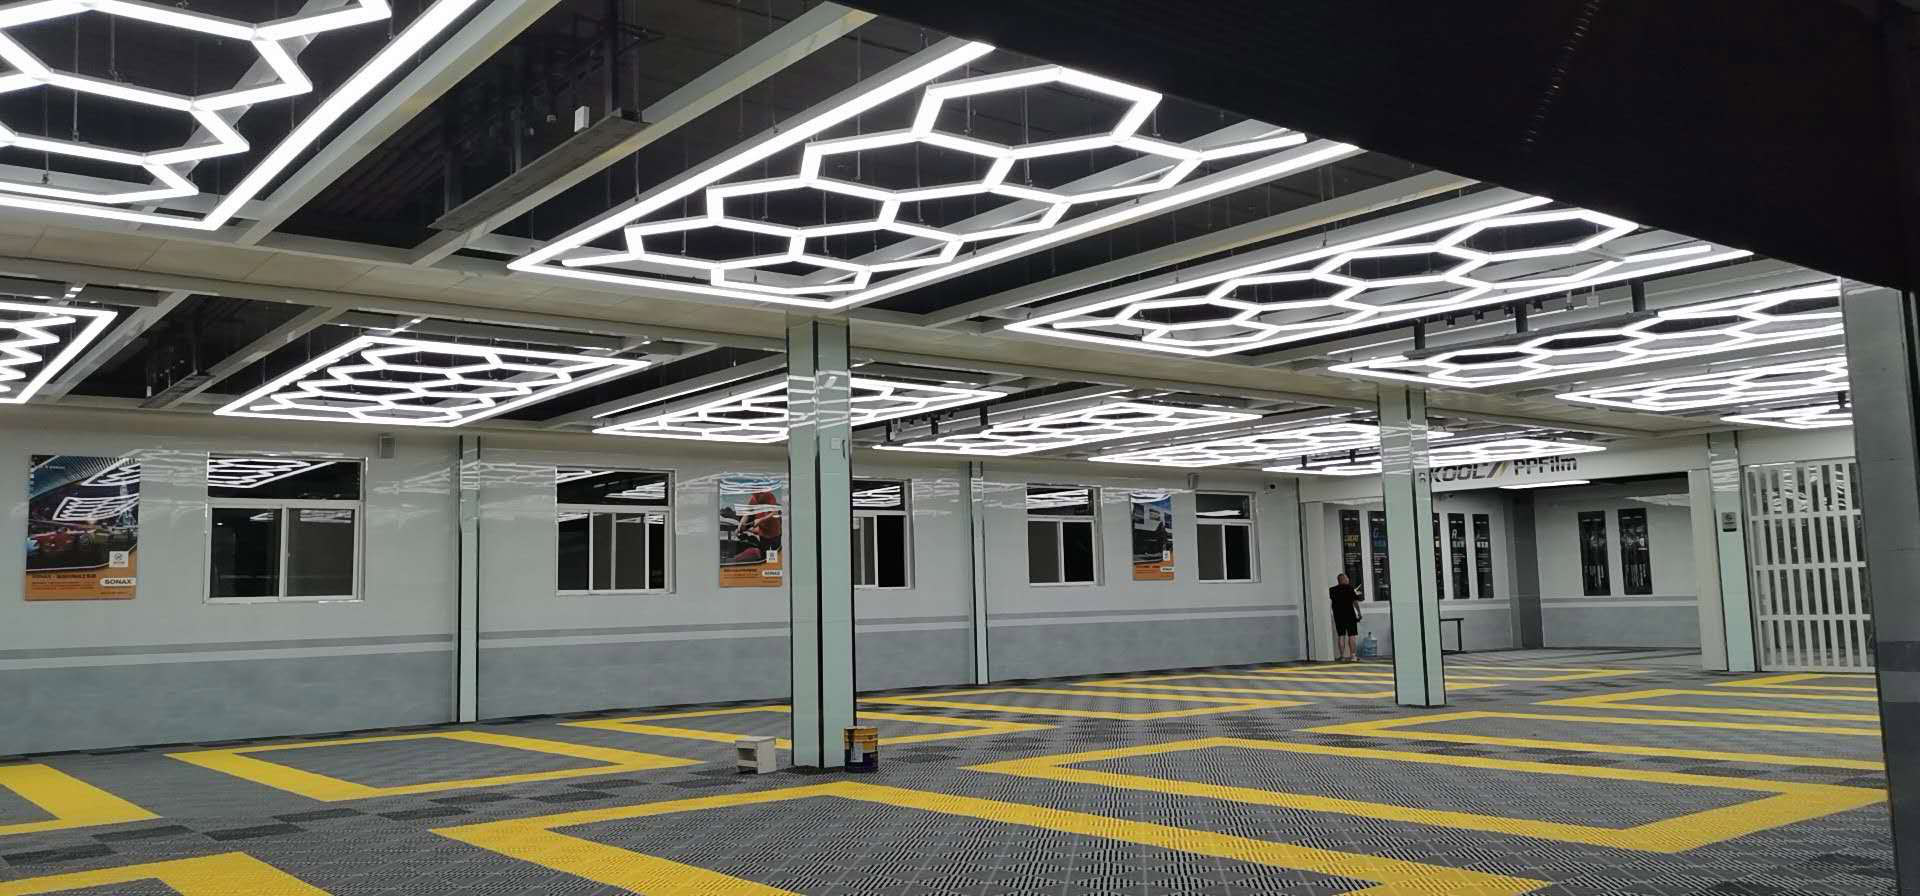 SS-HX-C202 Honeycomb Design hexagon Led Lights Auto Detailing Products Light  Bar for Wash Station Garage Ceiling - SINOSTAR